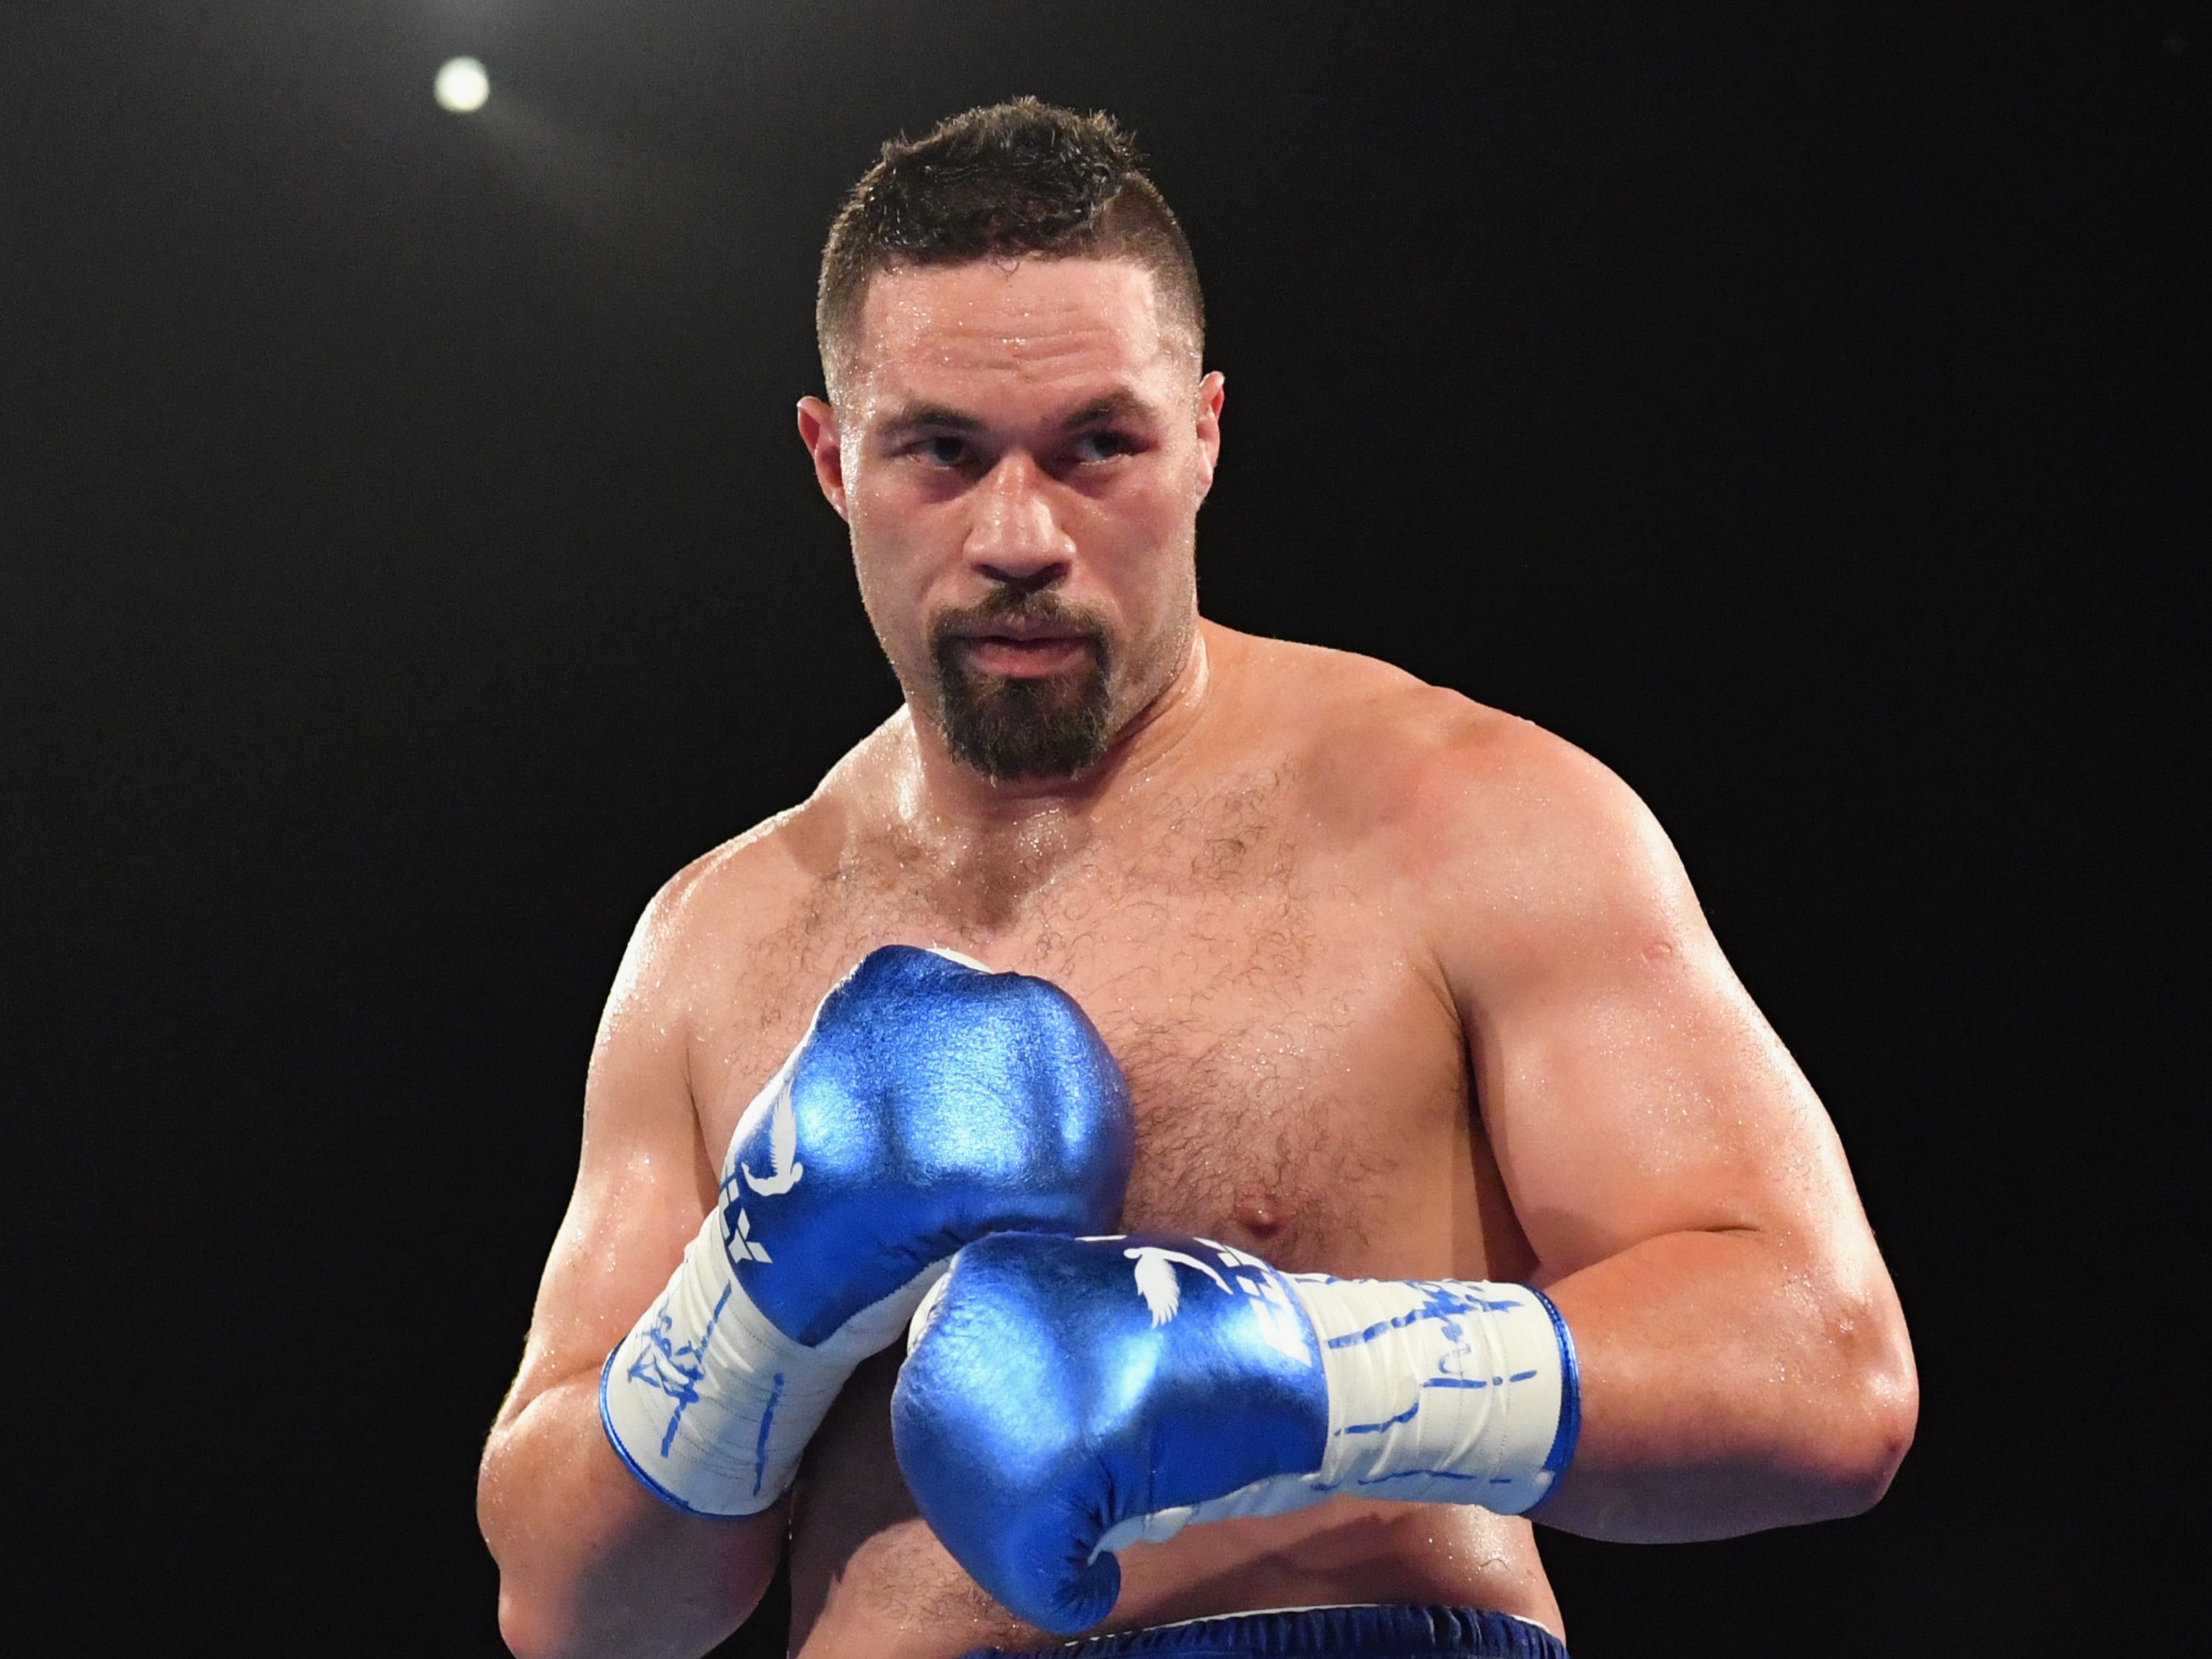 New Zealand heavyweight Joseph Parker is 30-2 with 21 knockout wins